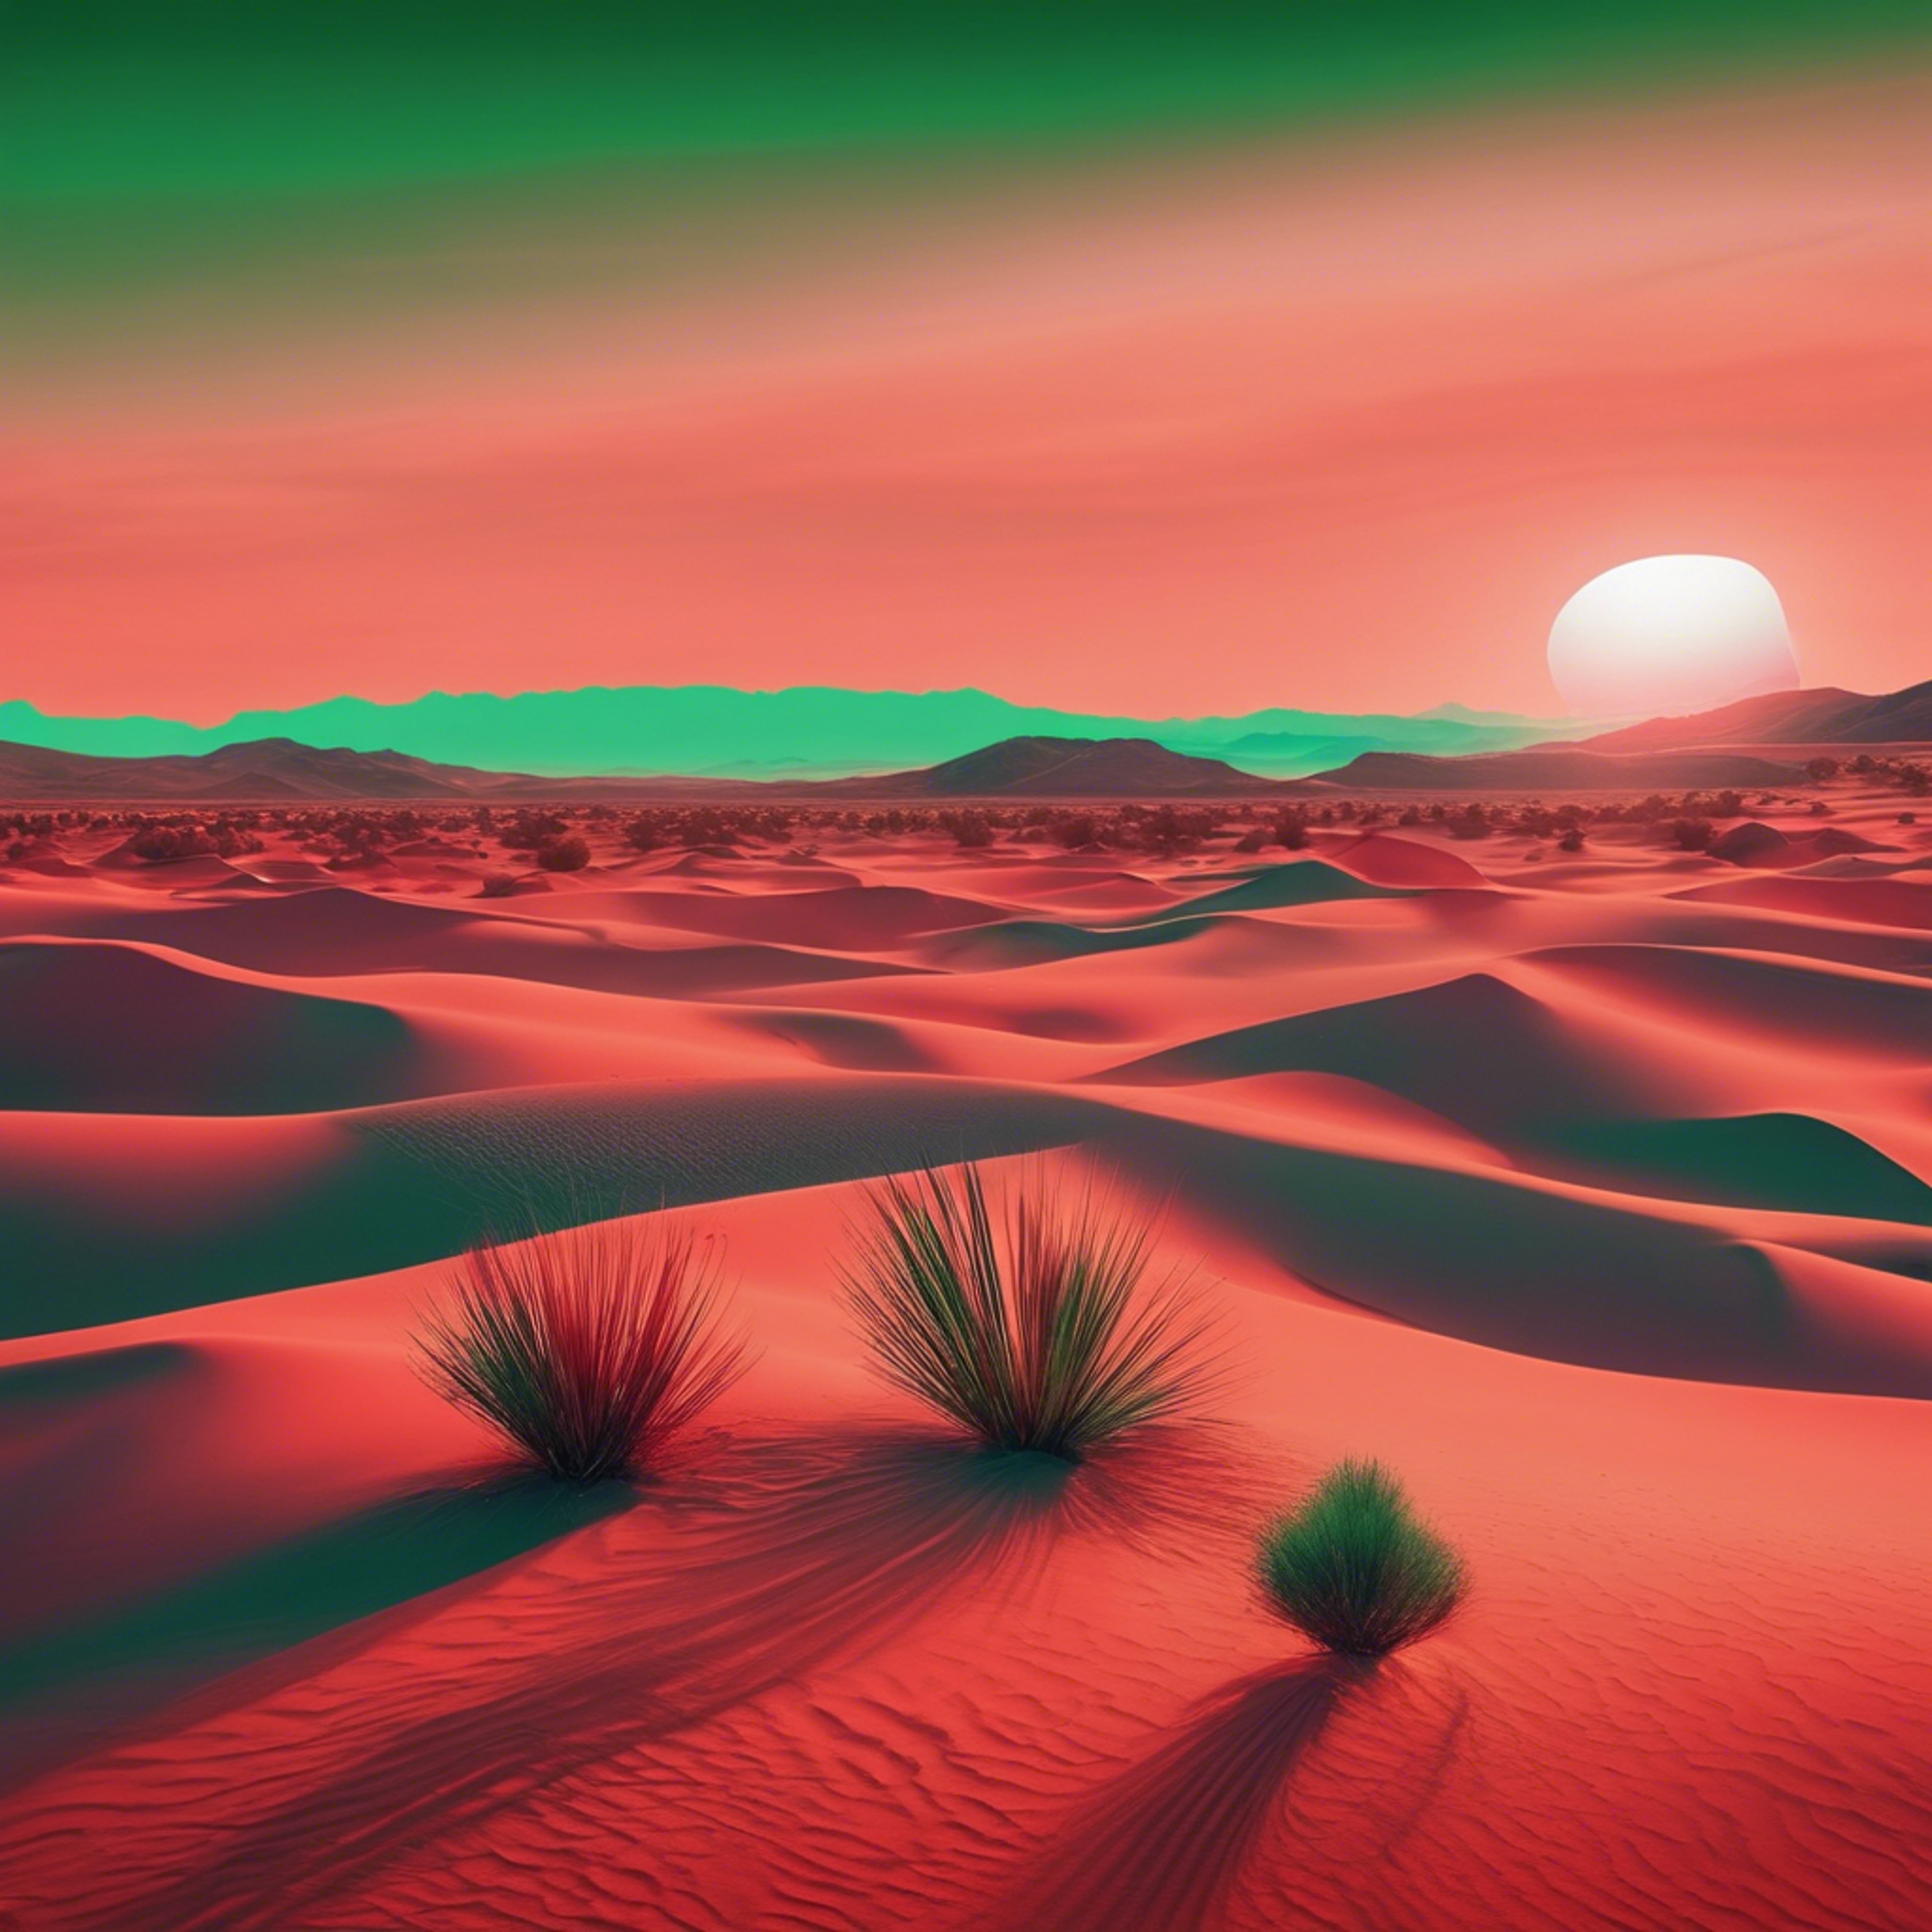 Abstract mirage in red and green, reminiscent of a modern artist's take on a desert sunset ផ្ទាំង​រូបភាព[3a4ec3a043b54638a7ad]